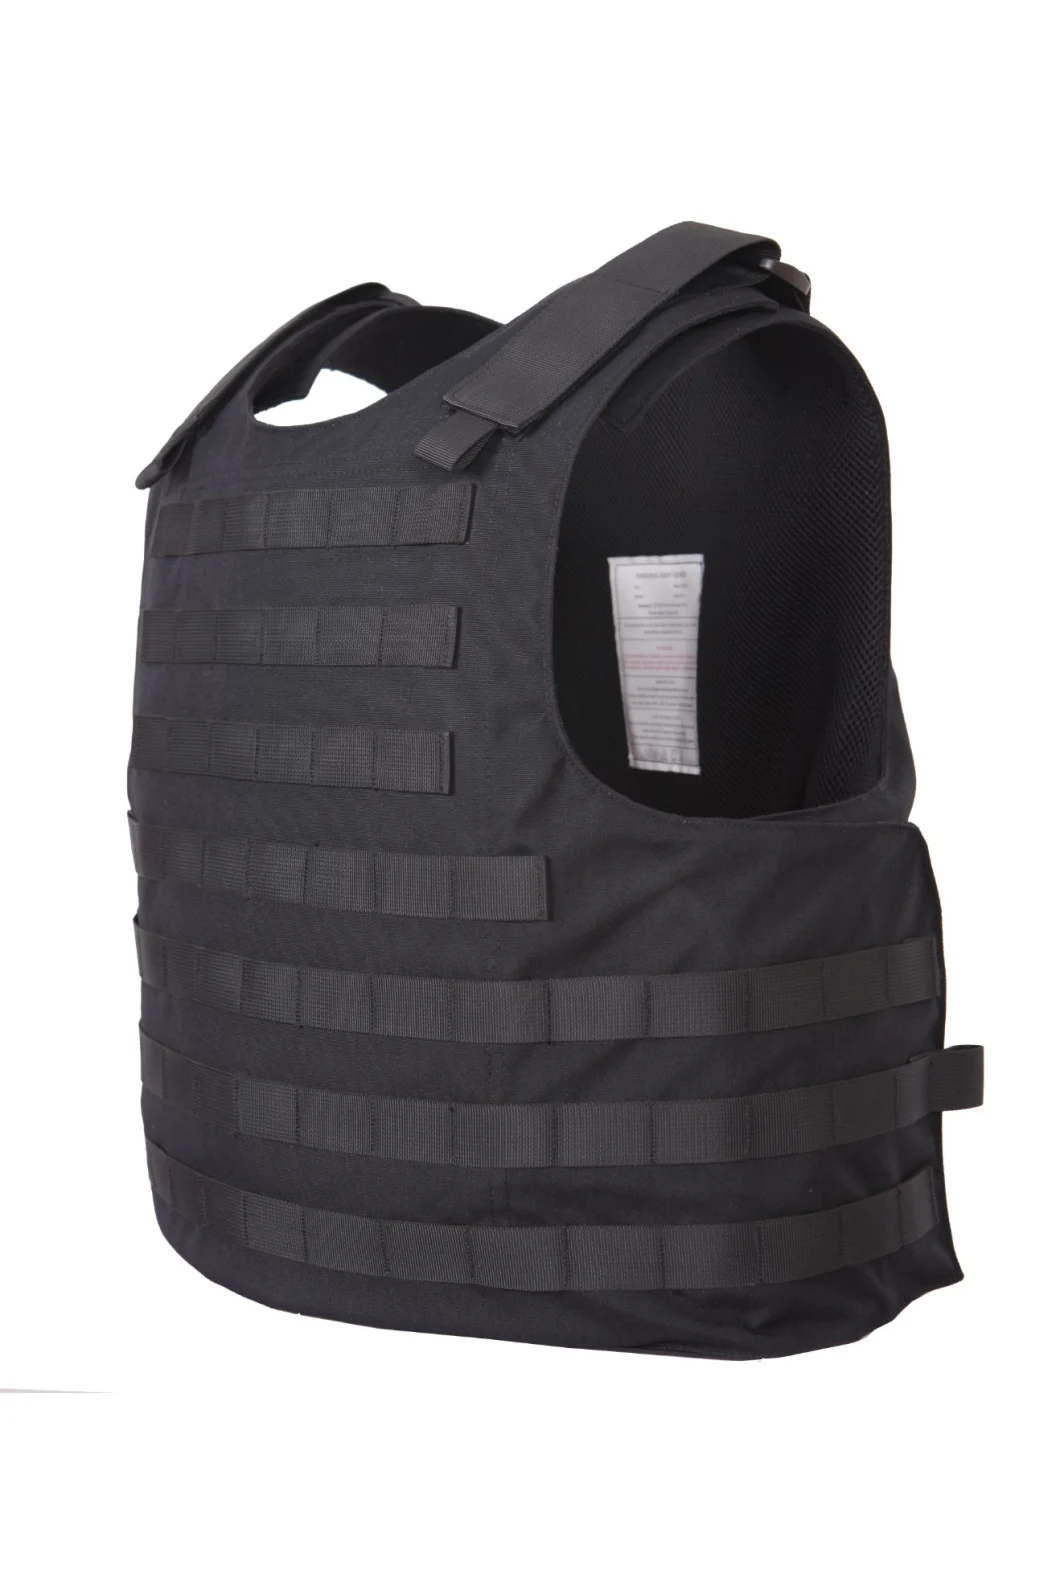 Tactical Stab-Proof Vest Made of Soft Aramid Woven Fabric